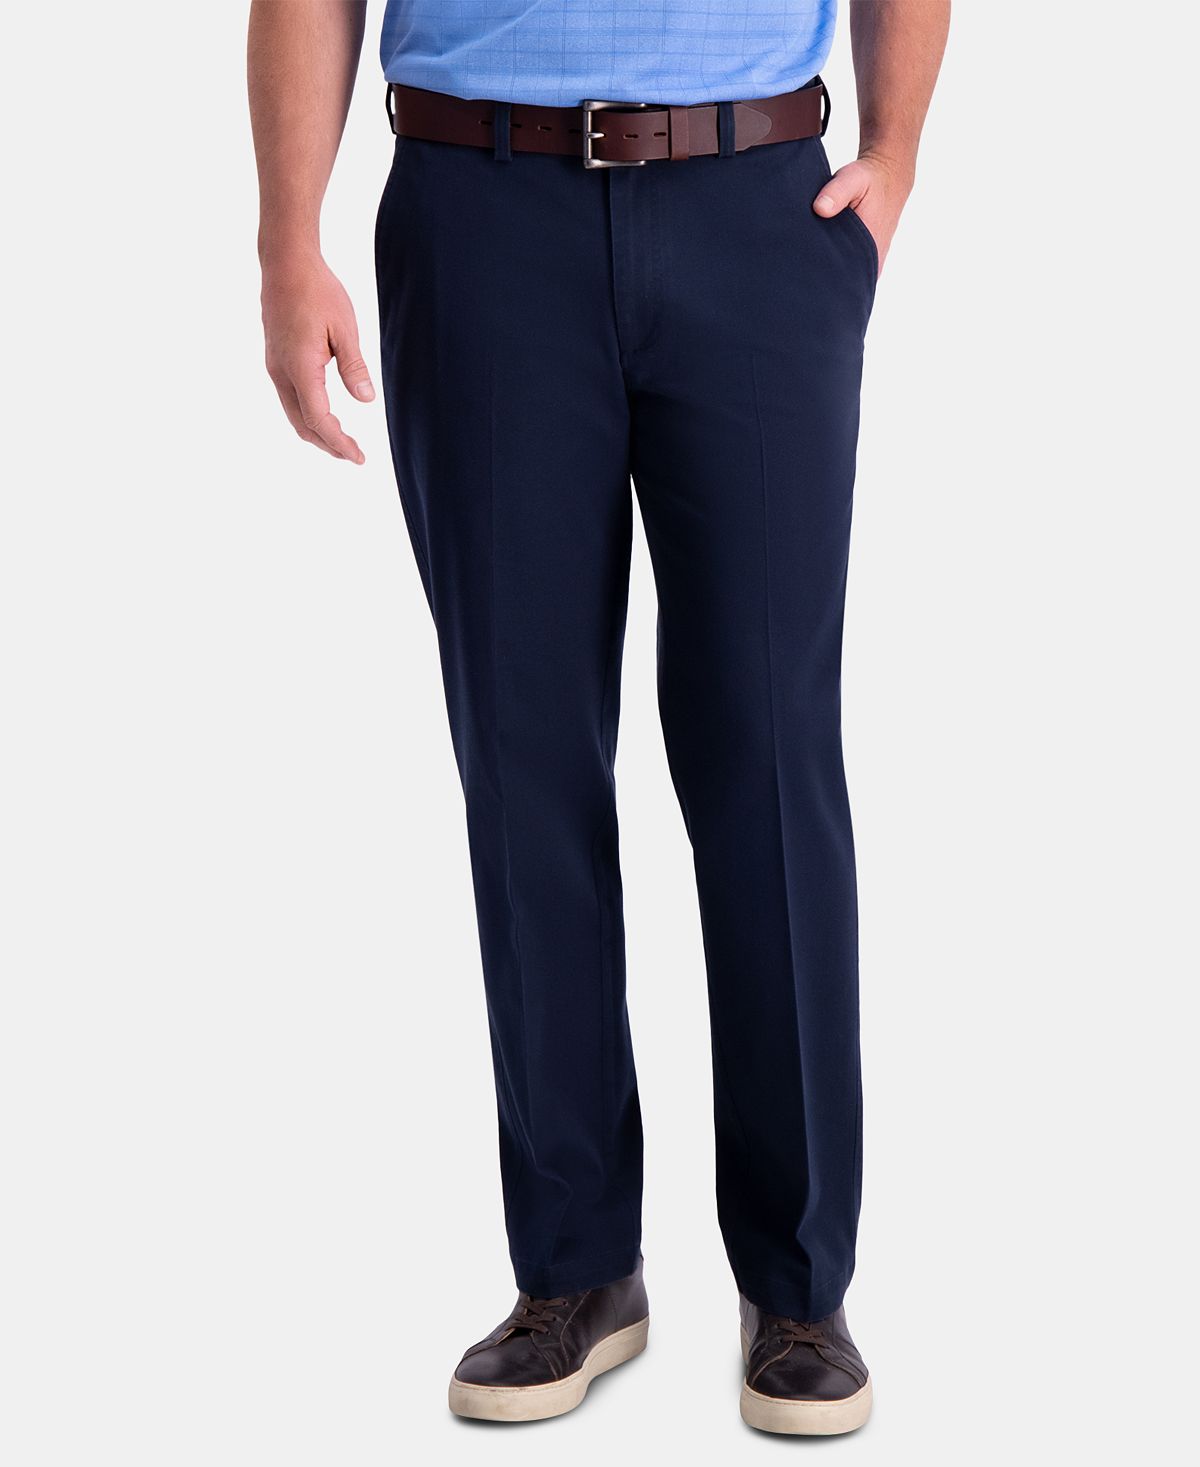 Haggar Premium Comfort Khaki Classic-fit 2-way Stretch Wrinkle Resistant Flat Front Stretch Casual Pants Dark Navy